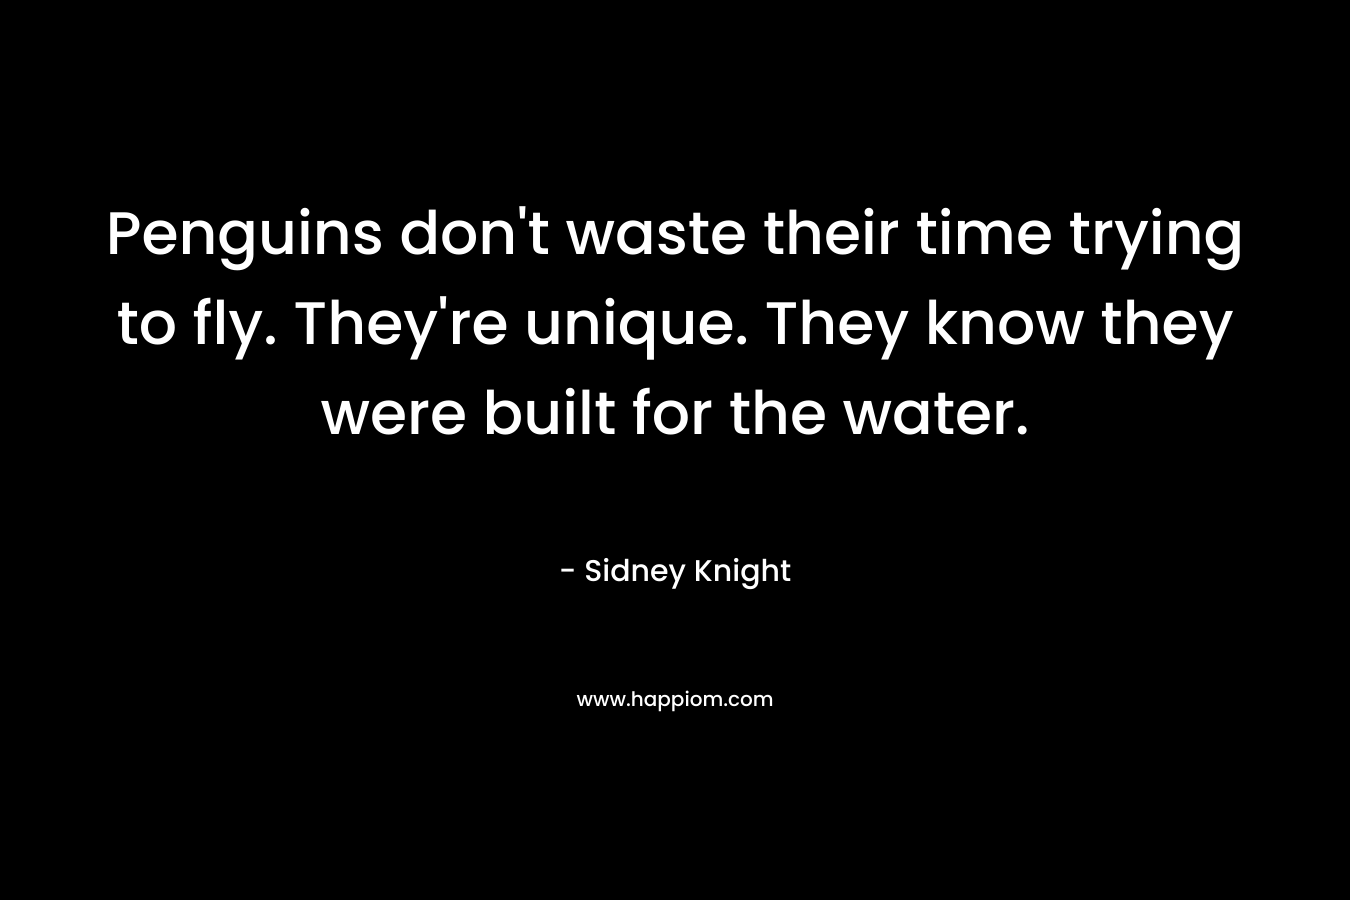 Penguins don’t waste their time trying to fly. They’re unique. They know they were built for the water. – Sidney Knight